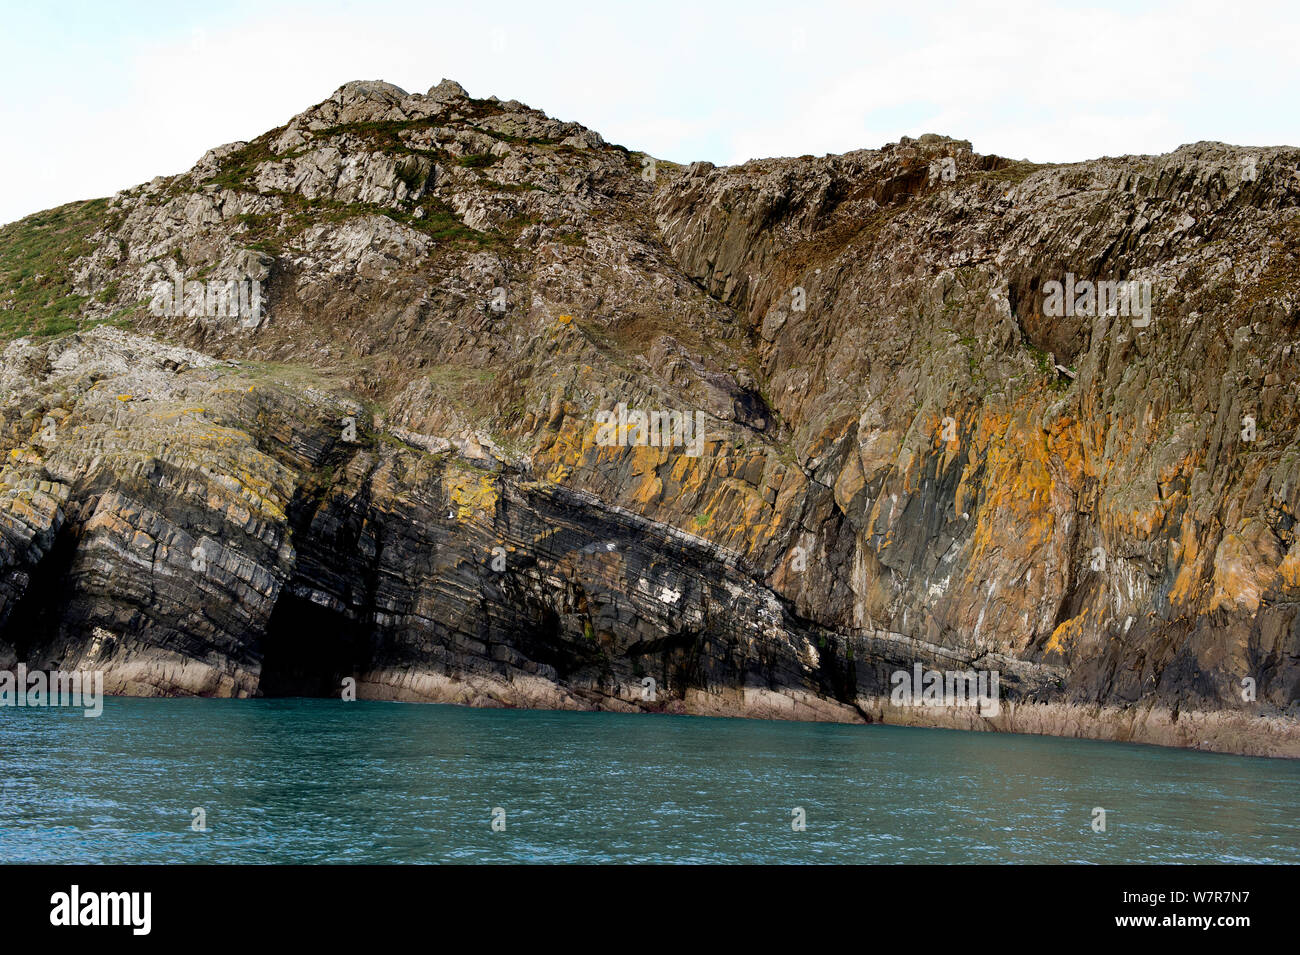 A thrust fault in Cambrian and pre-cambrian age sediments, Aberdarron, Lleyn, Wales, Novemeber 2012 Stock Photo